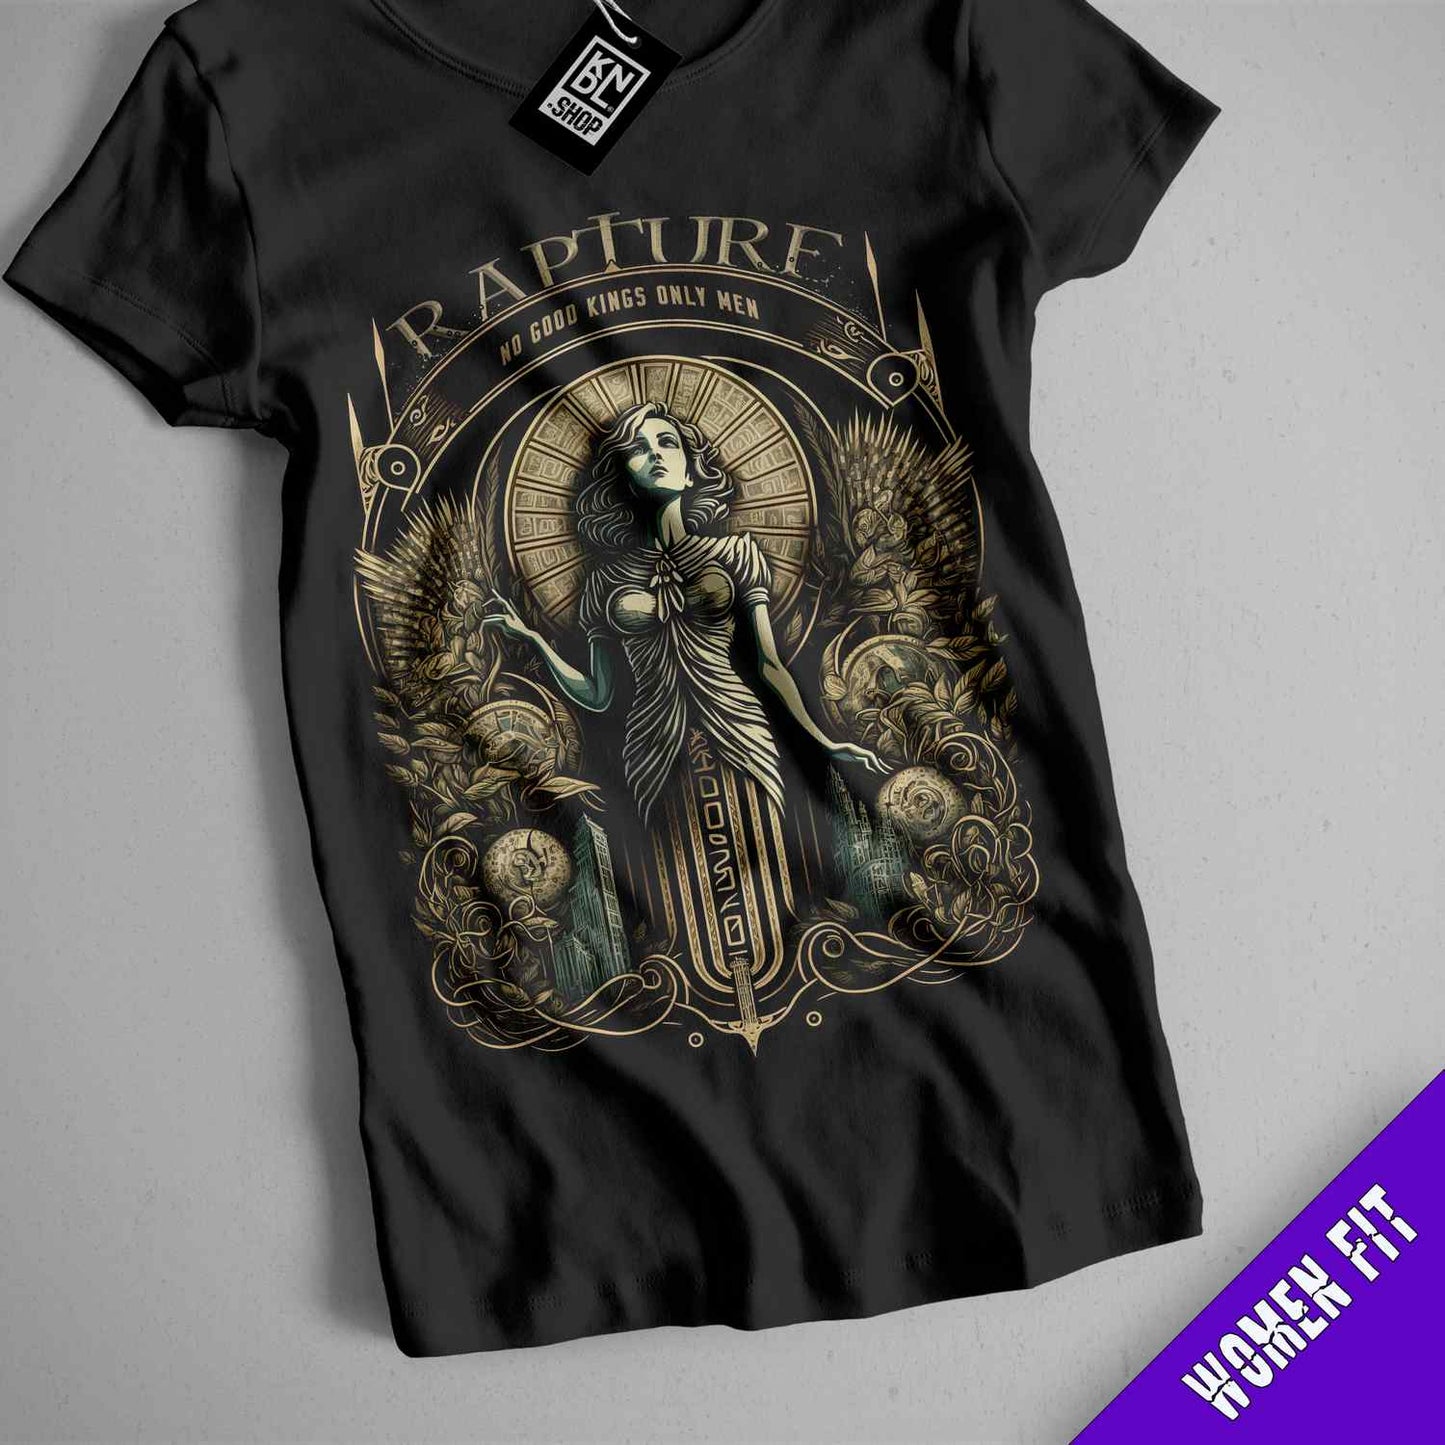 a t - shirt with an image of a woman holding a cross